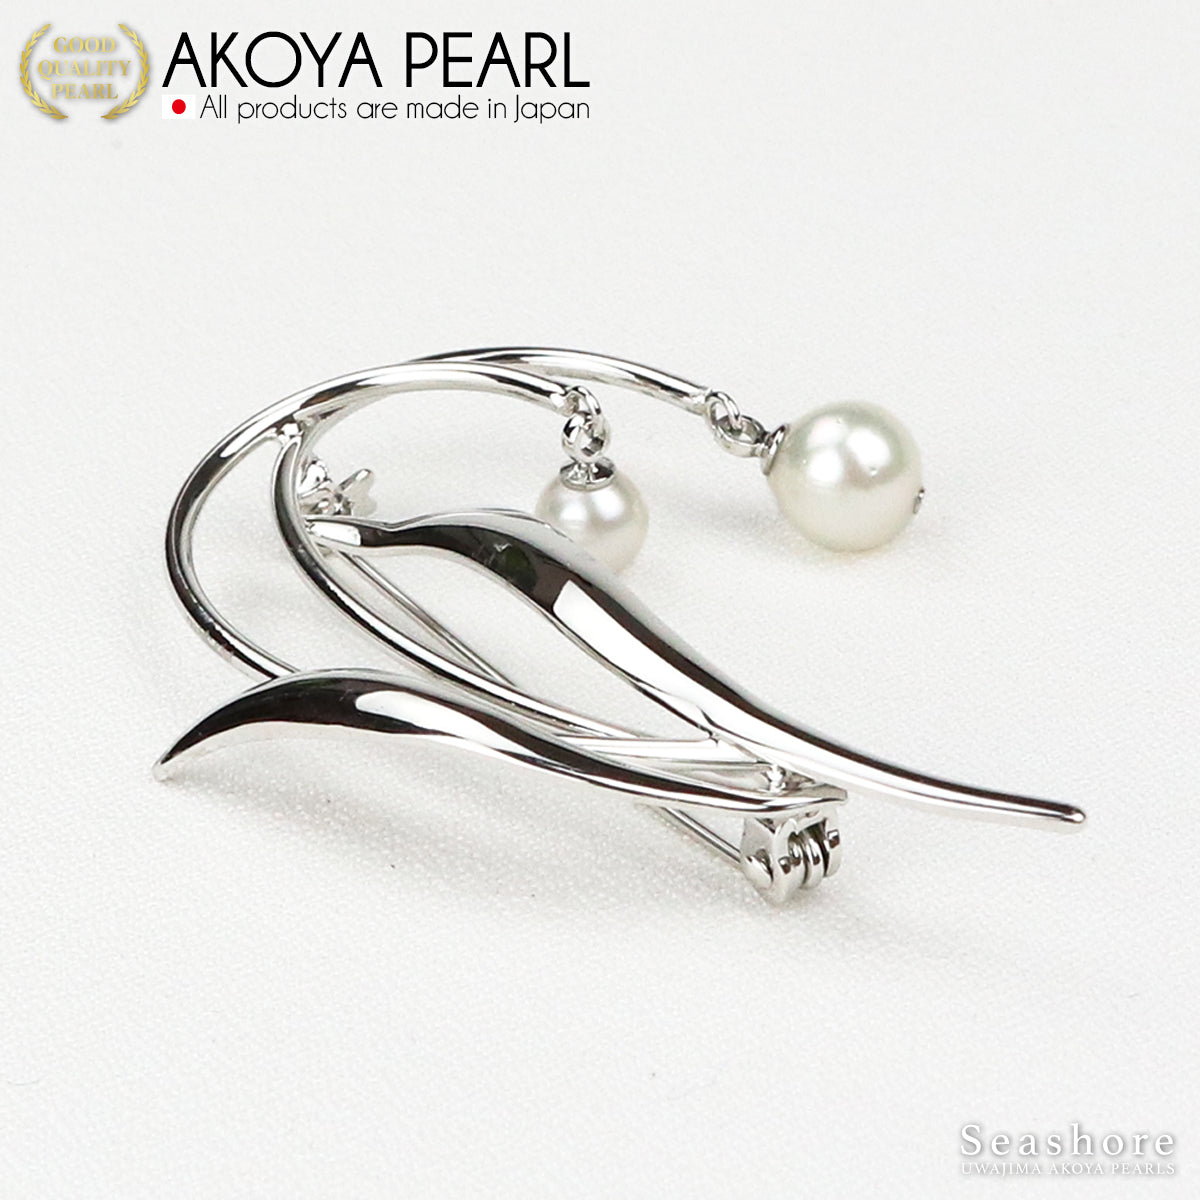 Pearl Brooch Orchid Lily of the Valley Ladies Brass White 6.5-8.5mm Akoya Pearl with Storage Case (3926)